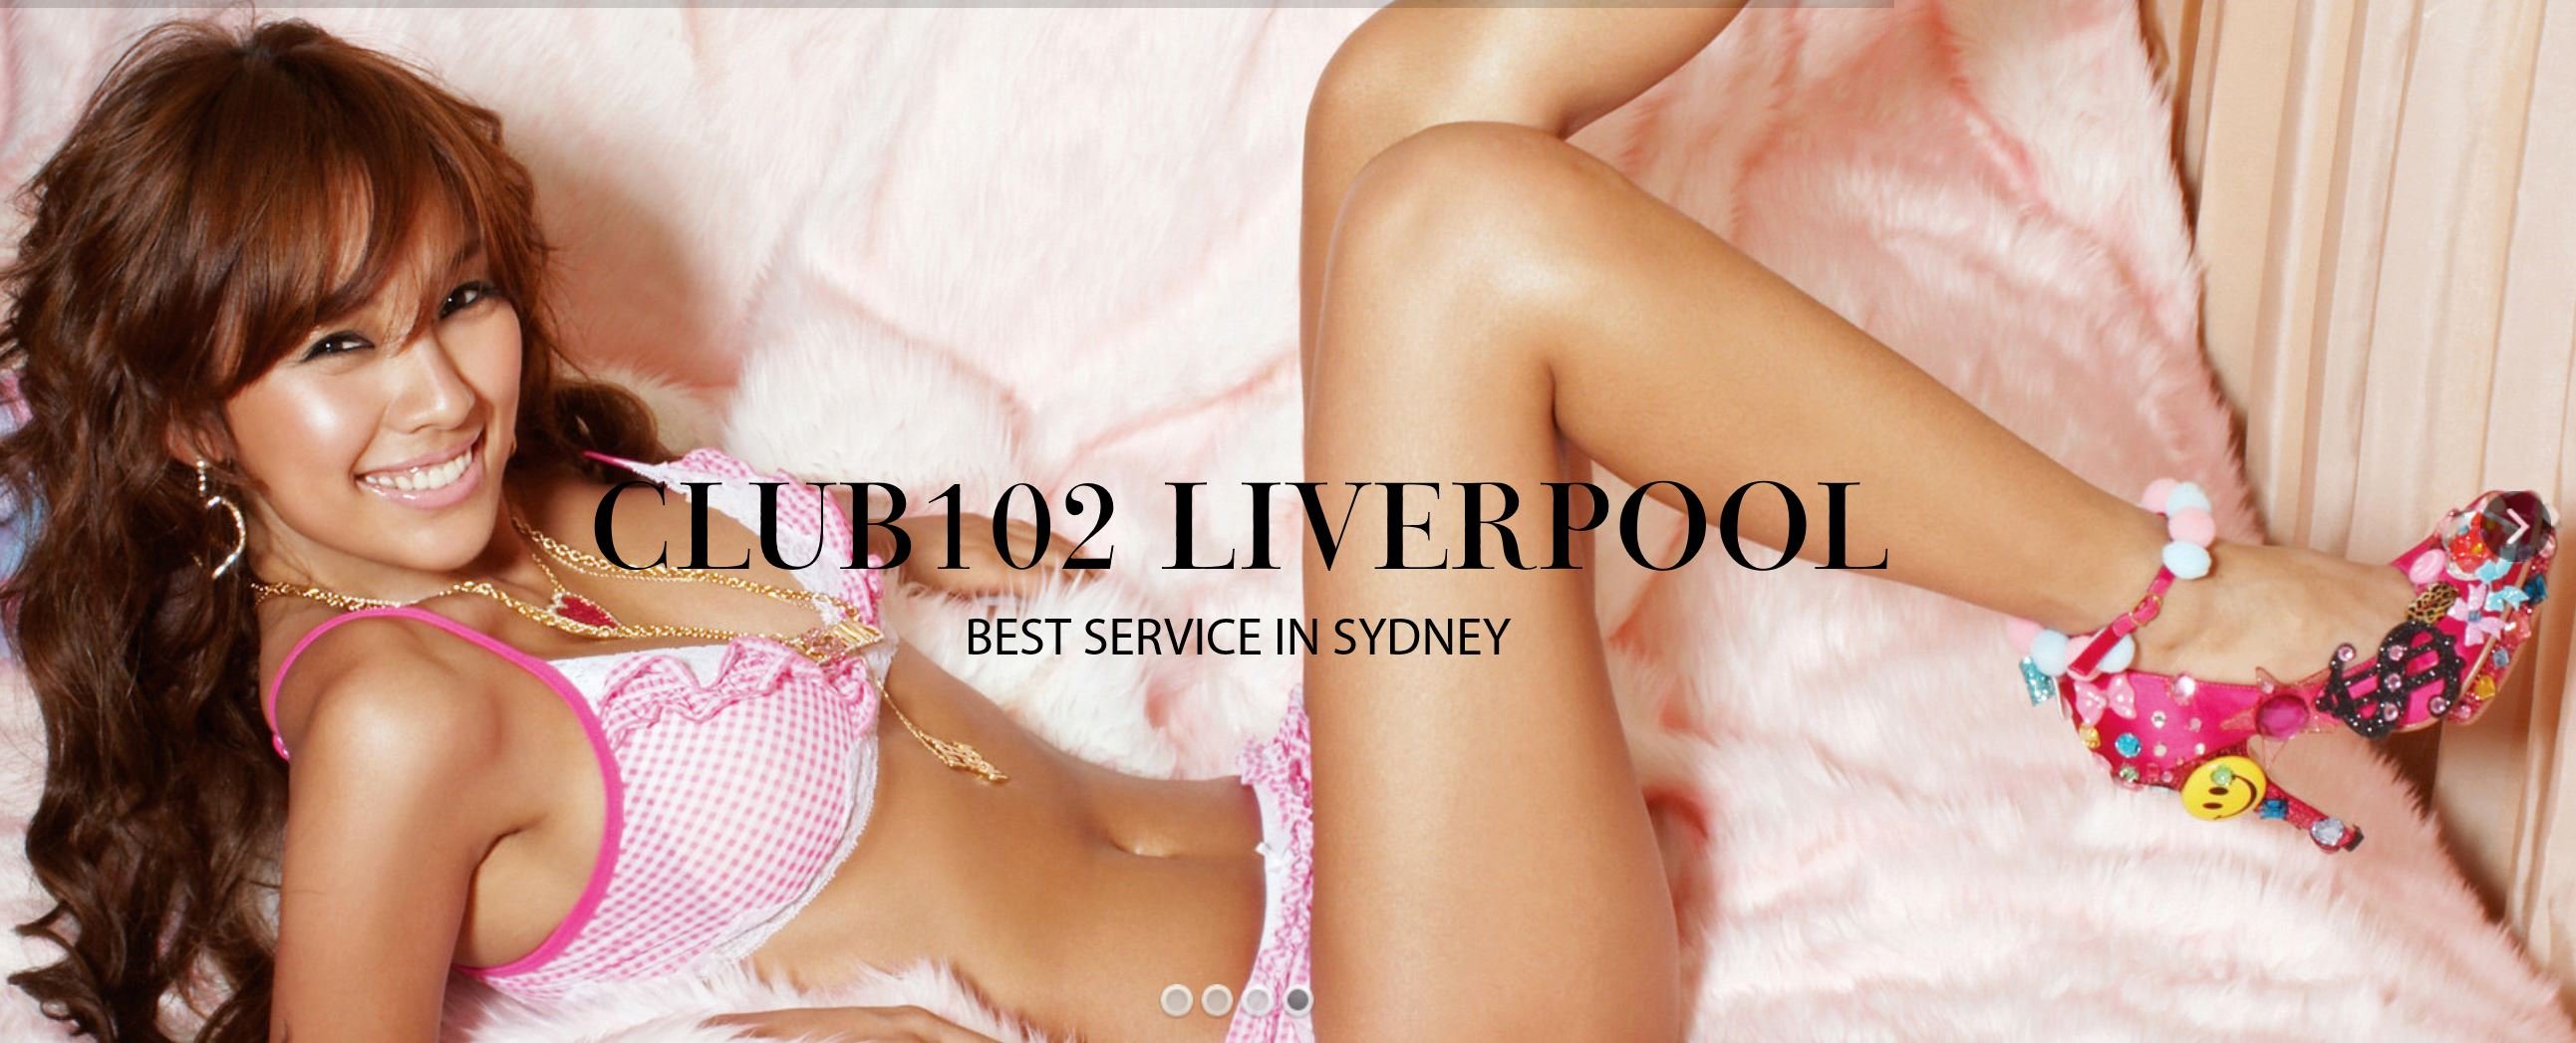 Punter Planet Welcomes 102 Liverpool As Advertisers!